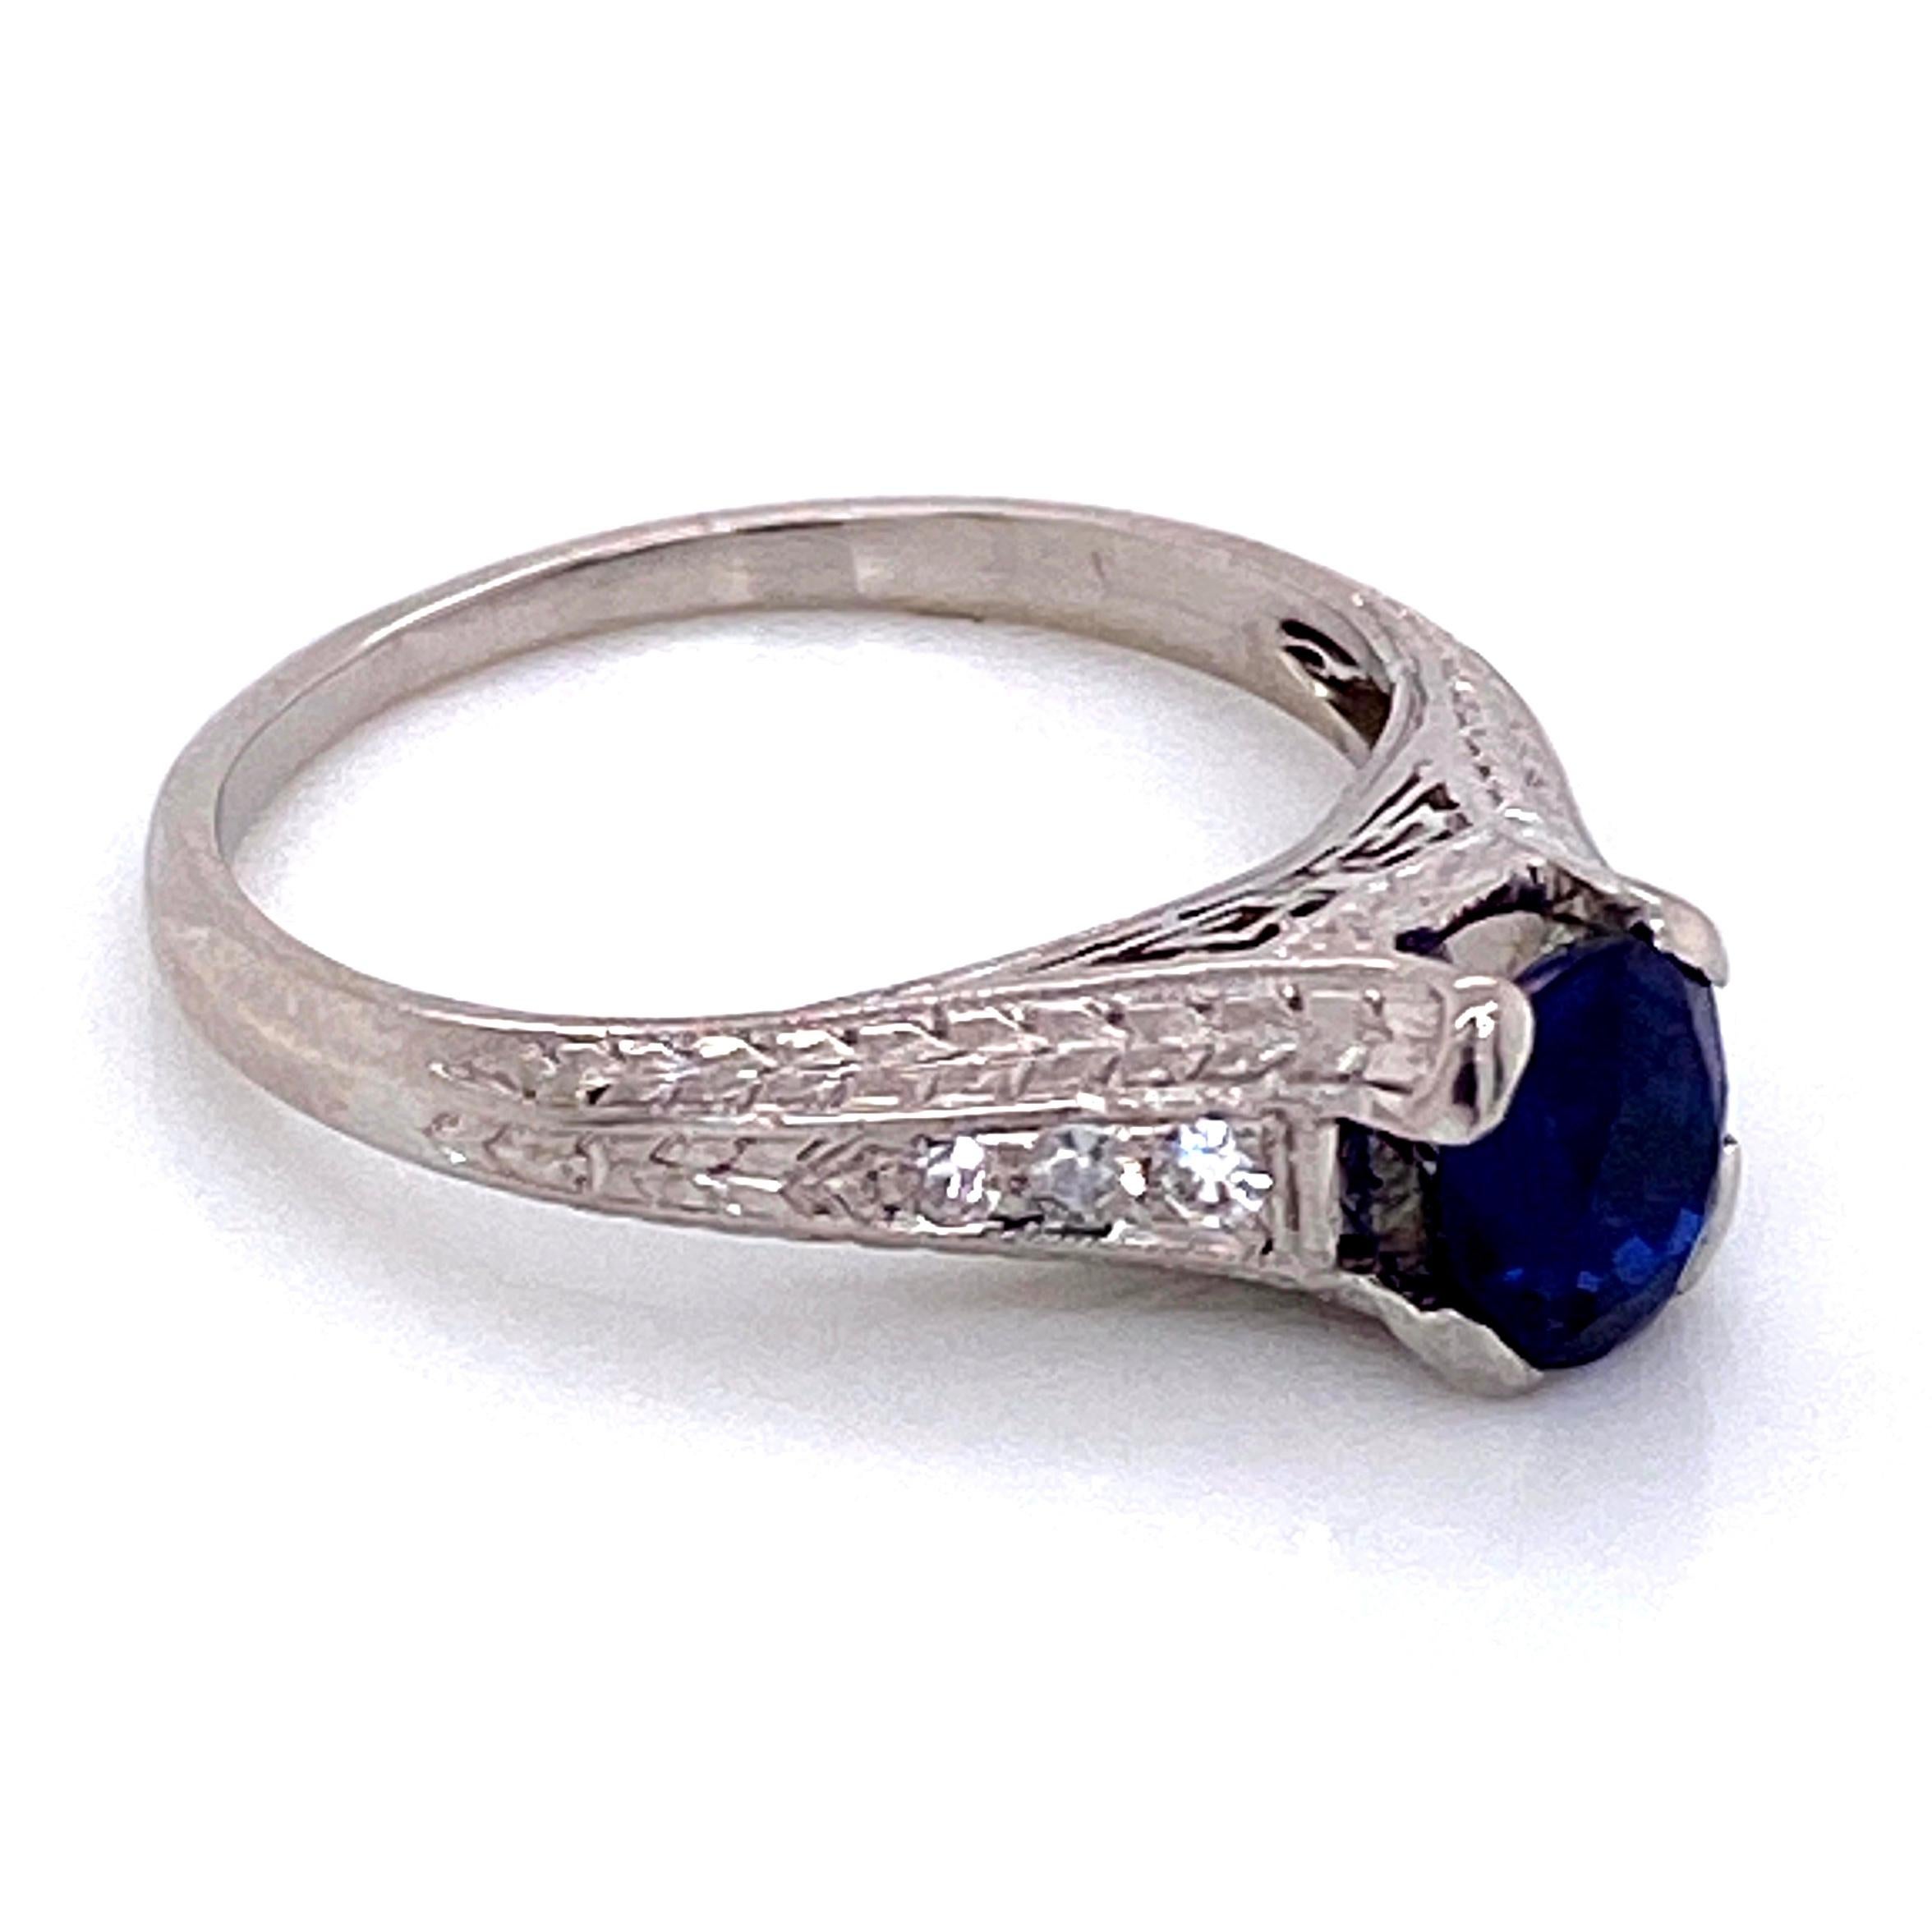 Vintage 1.05 Carat Sapphire Diamond Art Deco Platinum Ring Fine Estate Jewelry In Excellent Condition For Sale In Montreal, QC